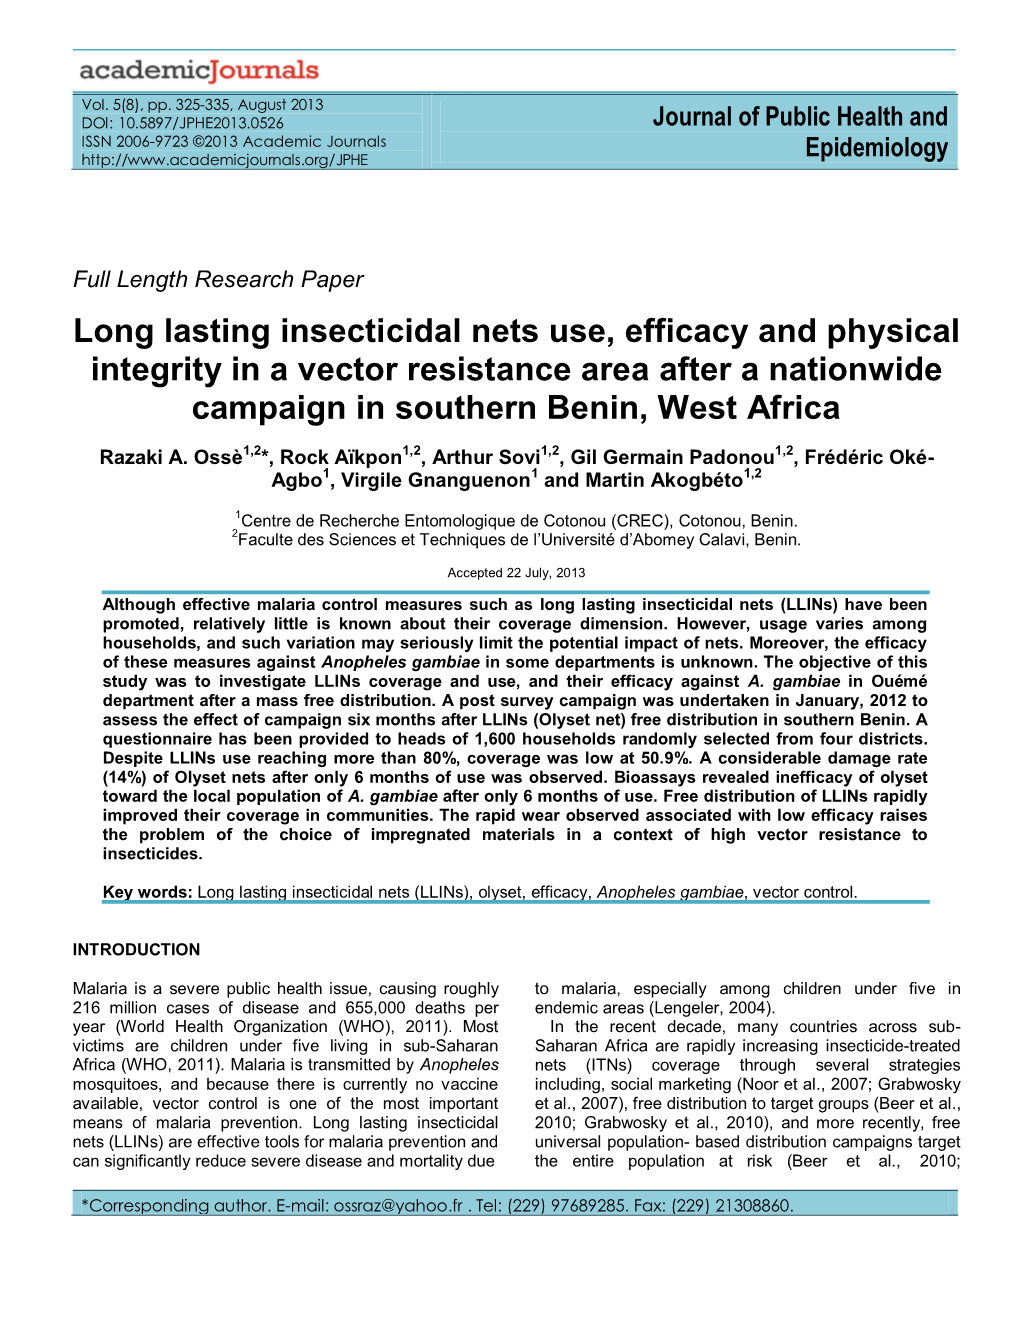 Long Lasting Insecticidal Nets Use, Efficacy and Physical Integrity in a Vector Resistance Area After a Nationwide Campaign in Southern Benin, West Africa